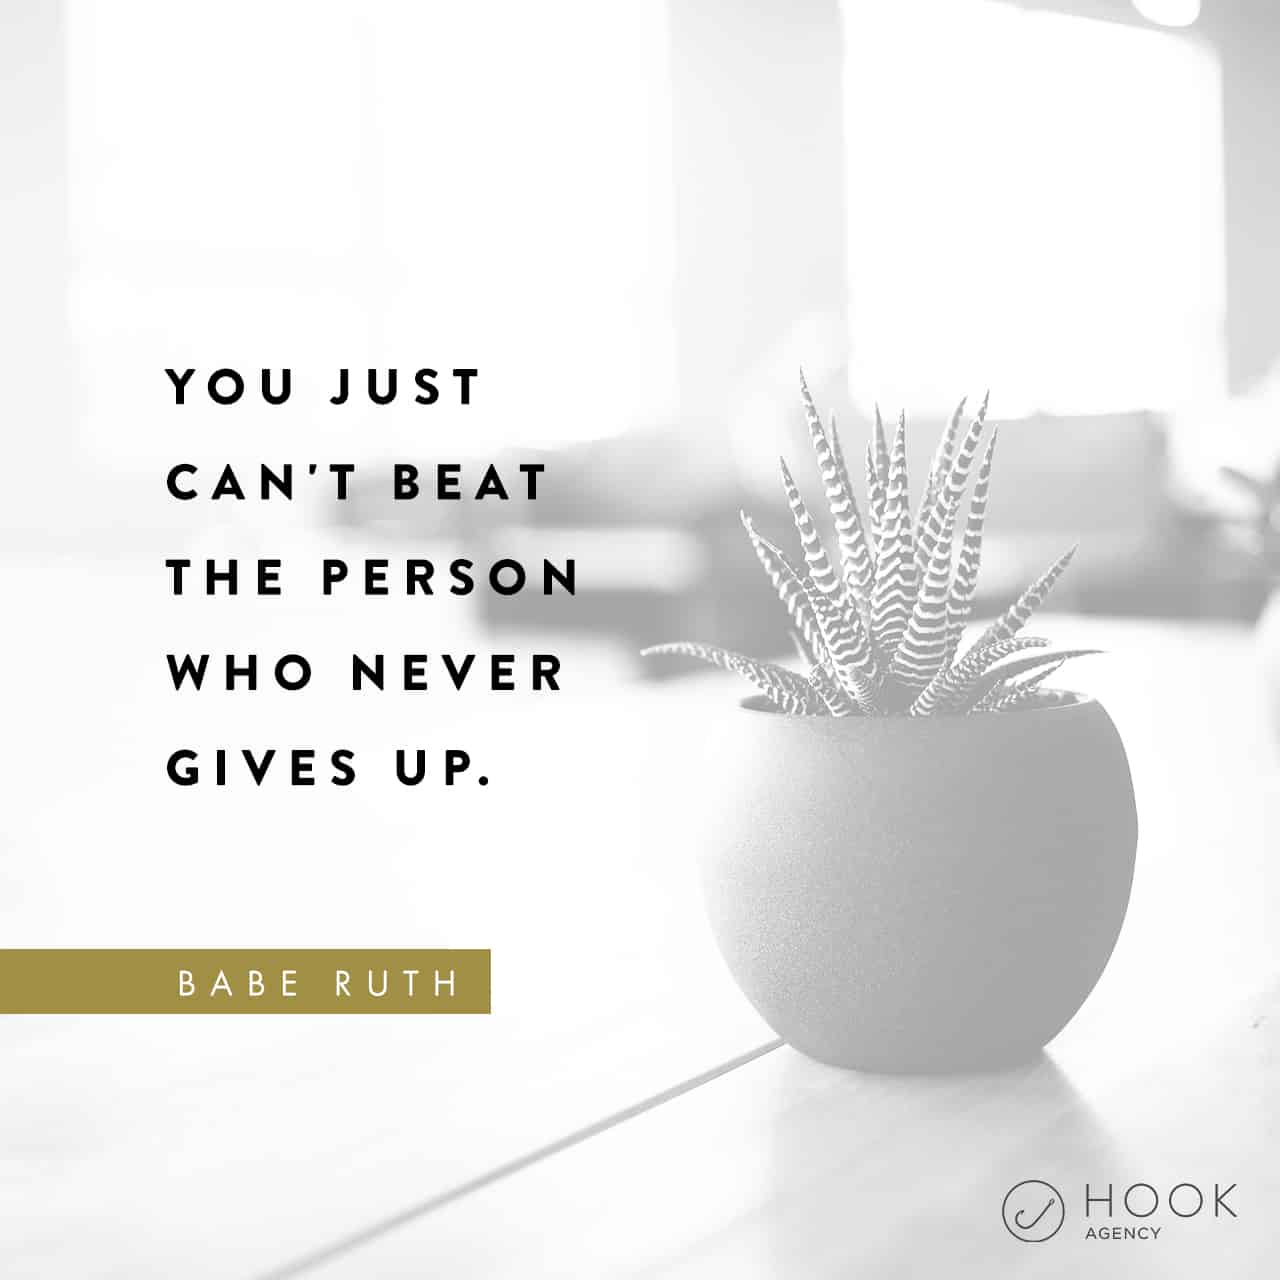 You Just Can't Bea the Person Who never gives up - Babe Ruth sales quotes for social media, instagram, inspirational, motivational social quotes